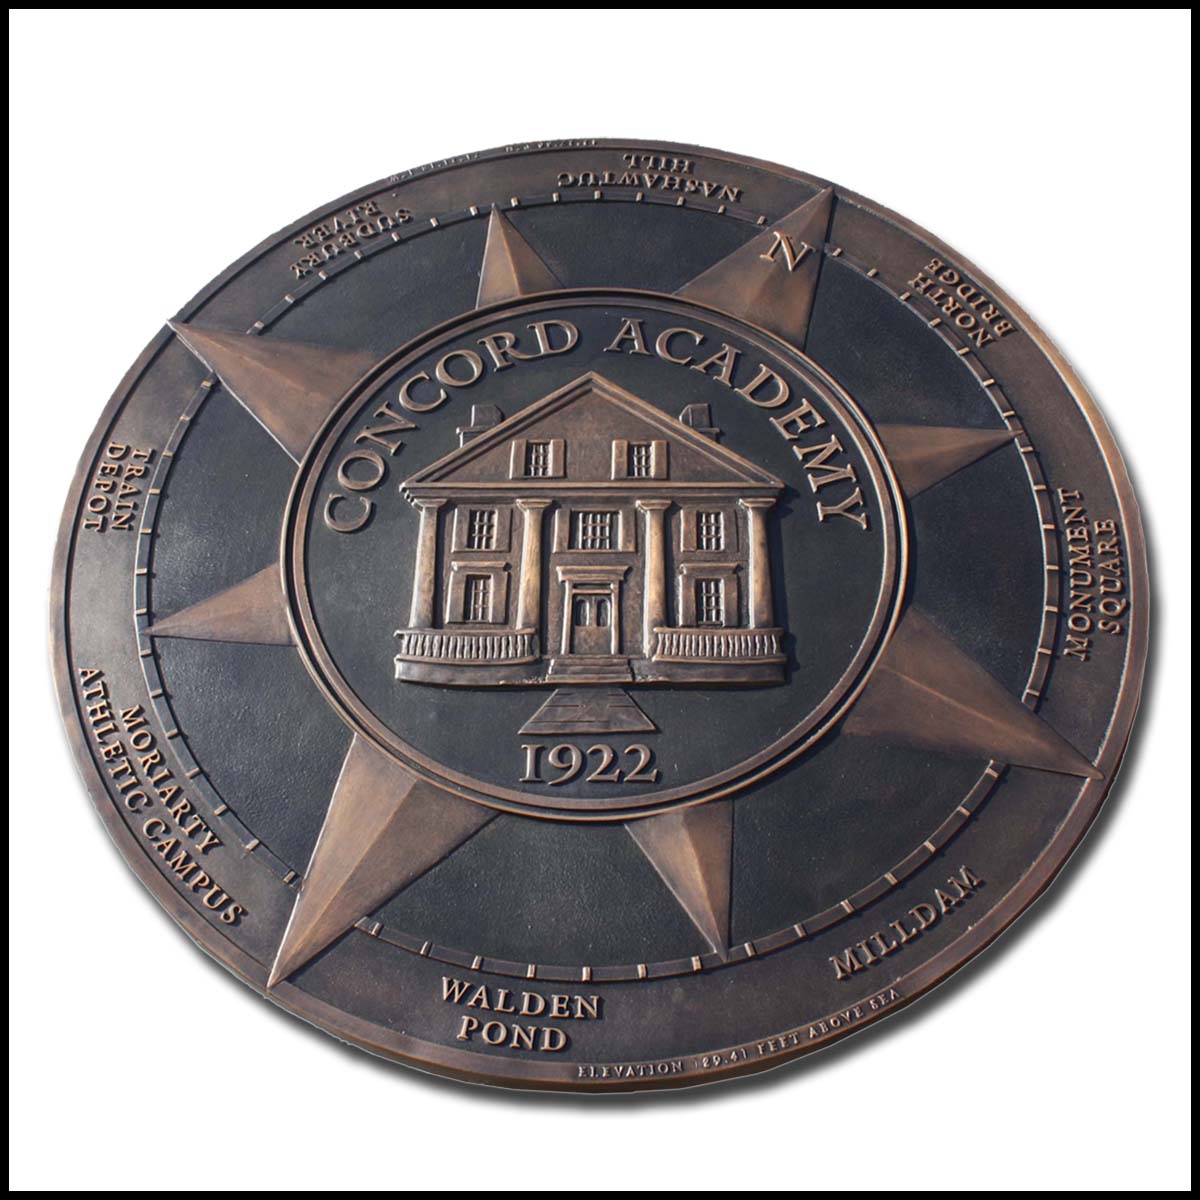 photo of bronze floor medallion with relief sculpture of building and compass elements